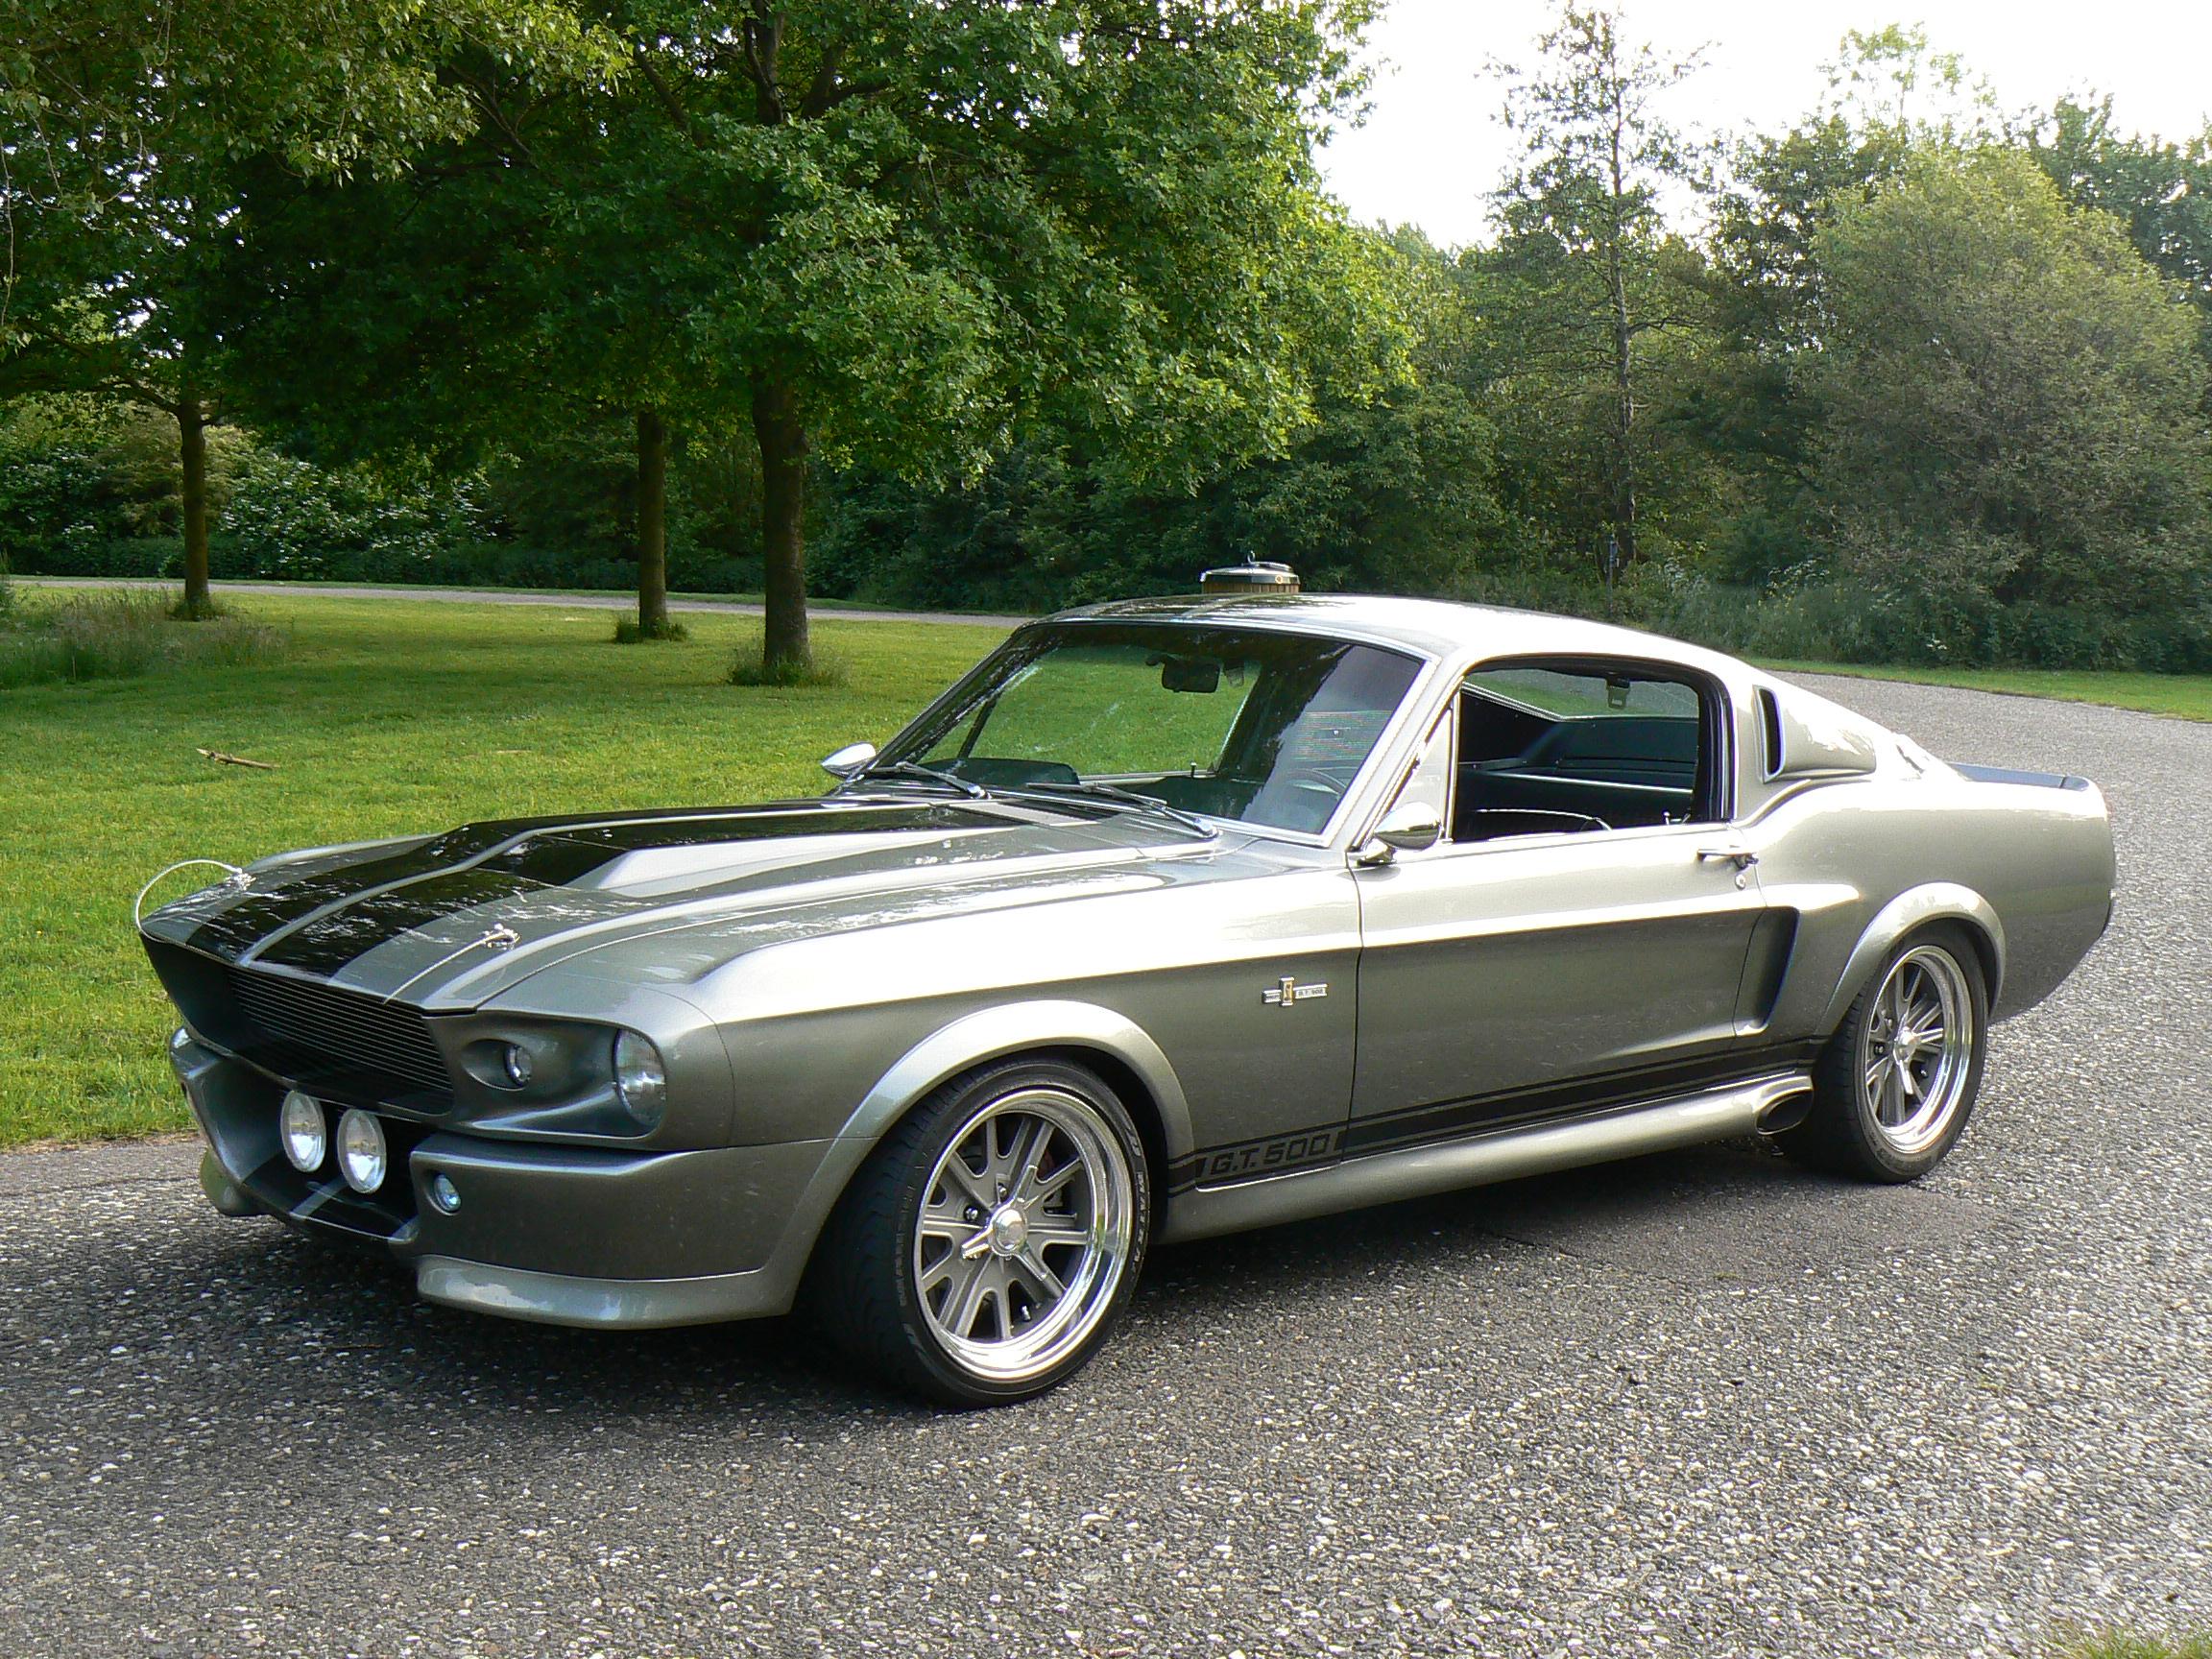 Ford usa mustang gt 500 eleanor